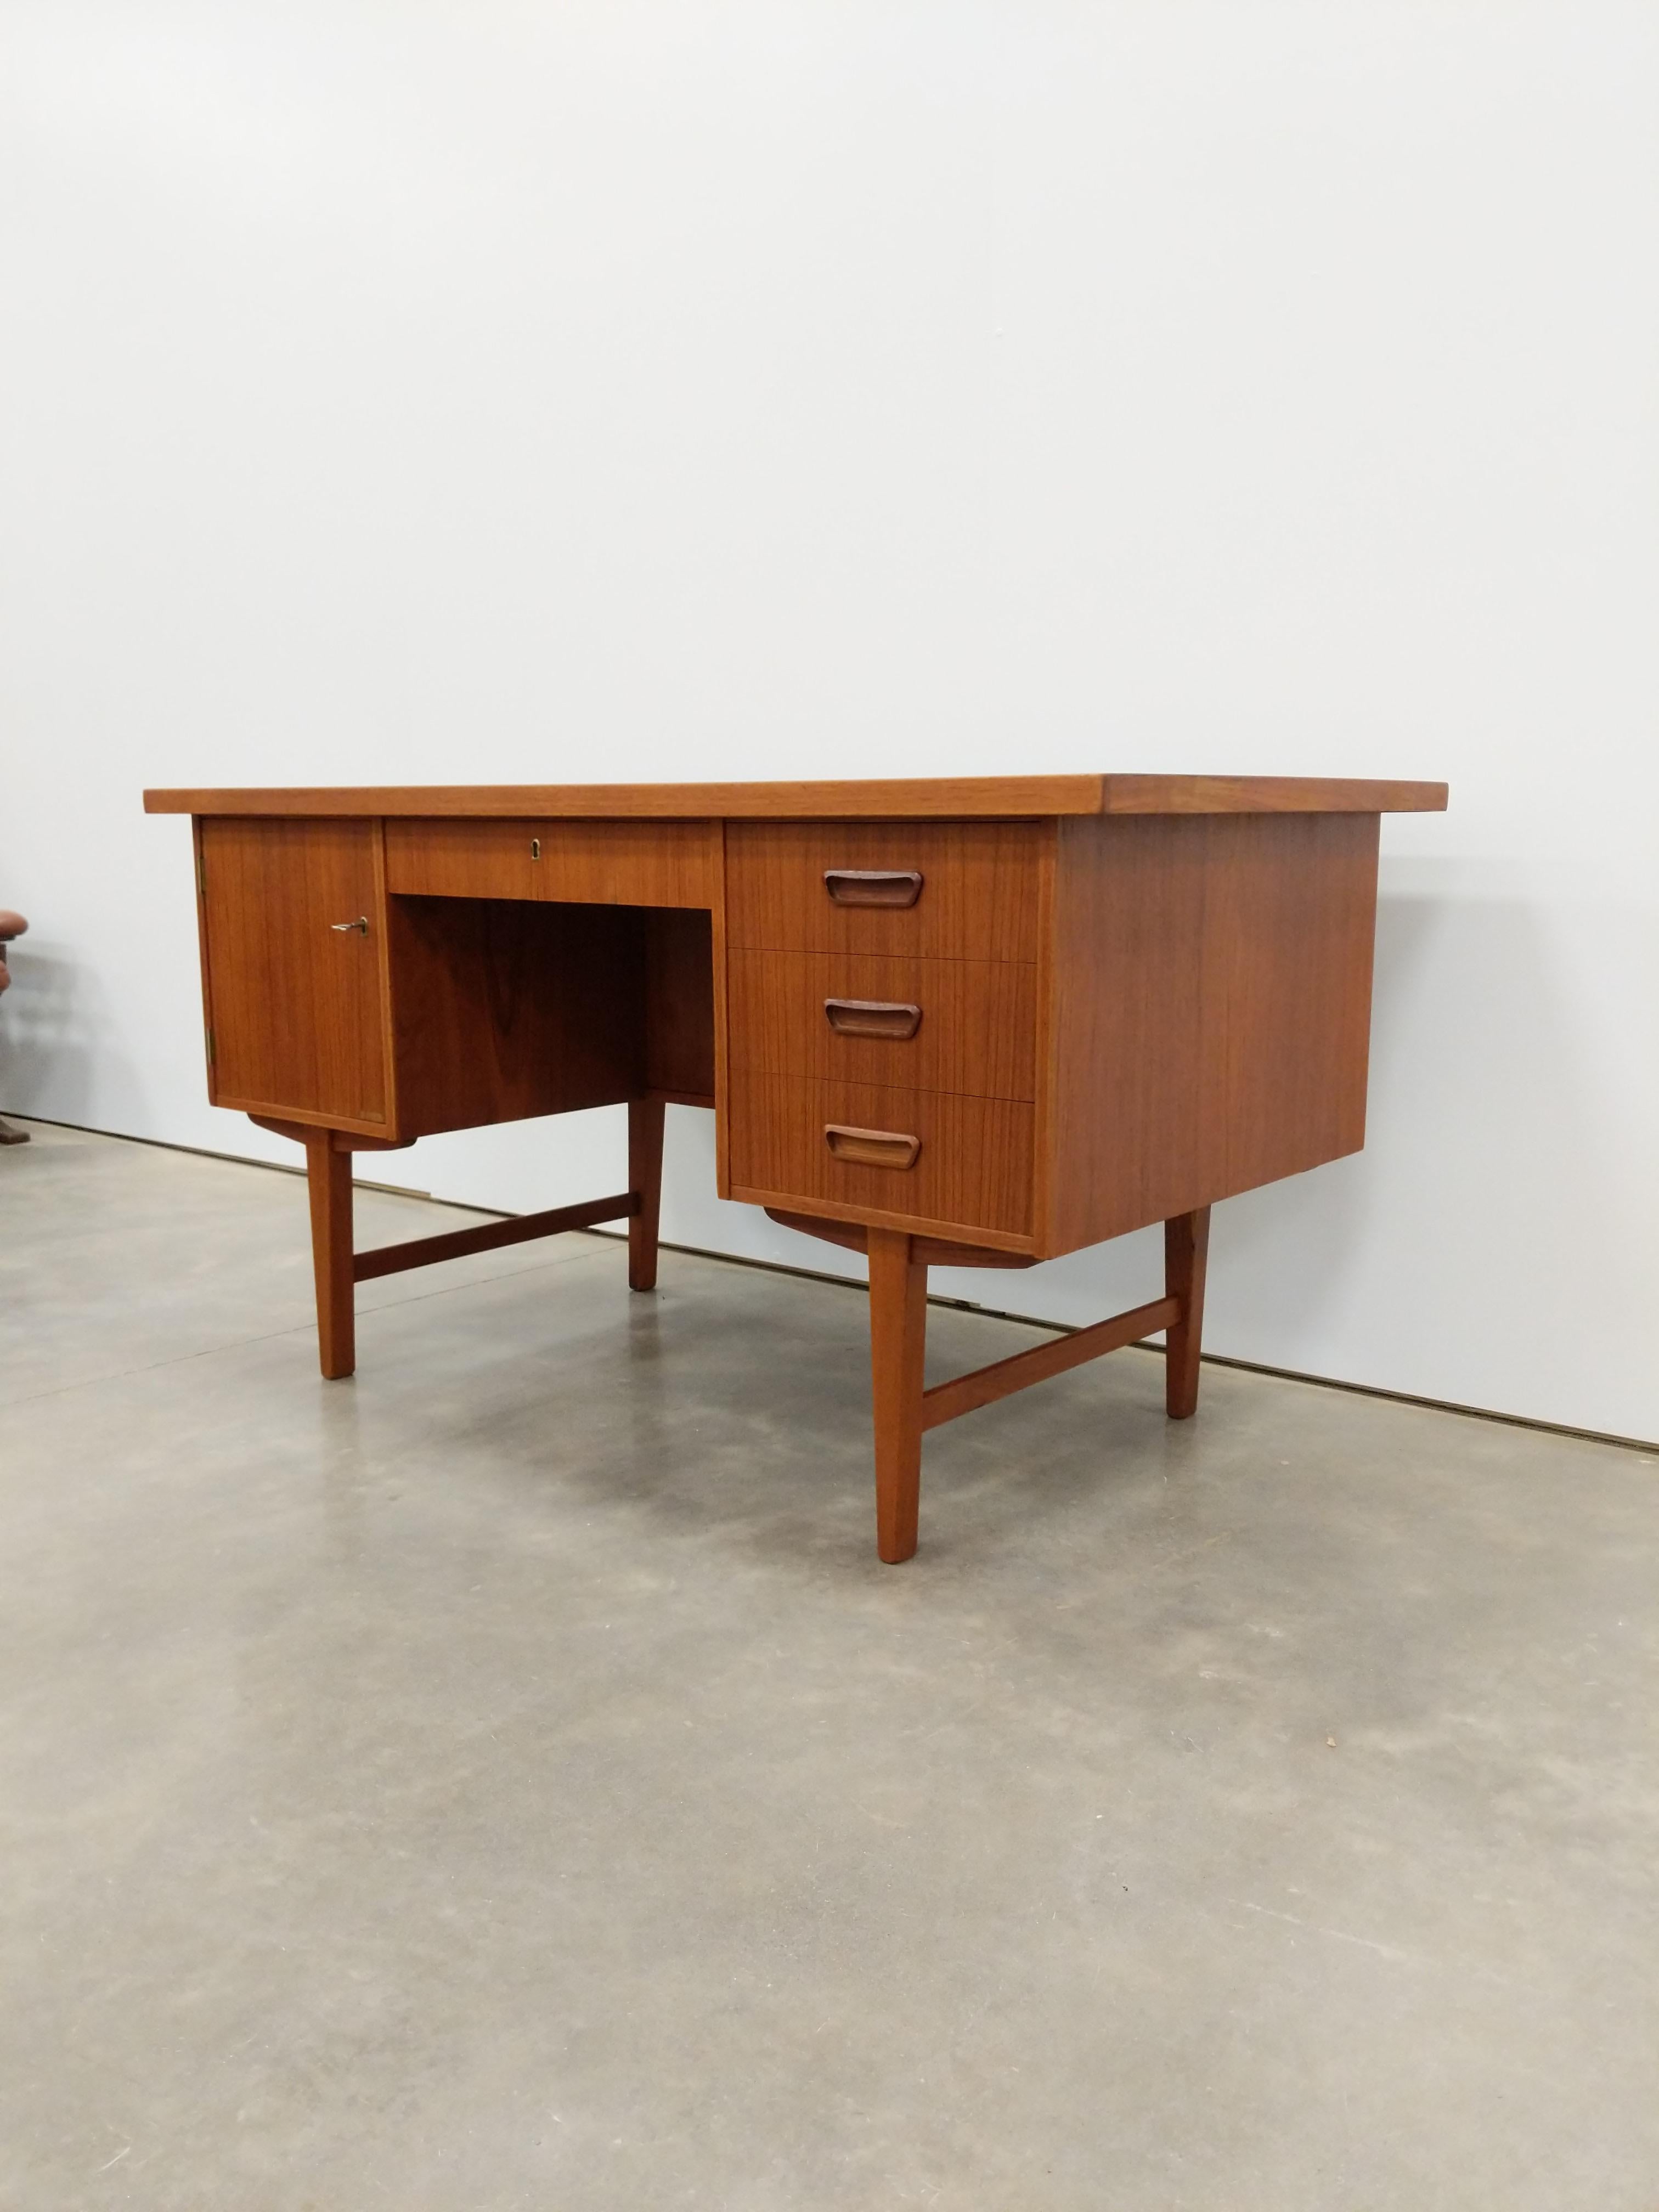 Authentic vintage mid century Danish / Scandinavian Modern teak desk.

This piece is in excellent refinished condition with very few signs of age-related wear (see photos).

If you would like any additional details, please contact